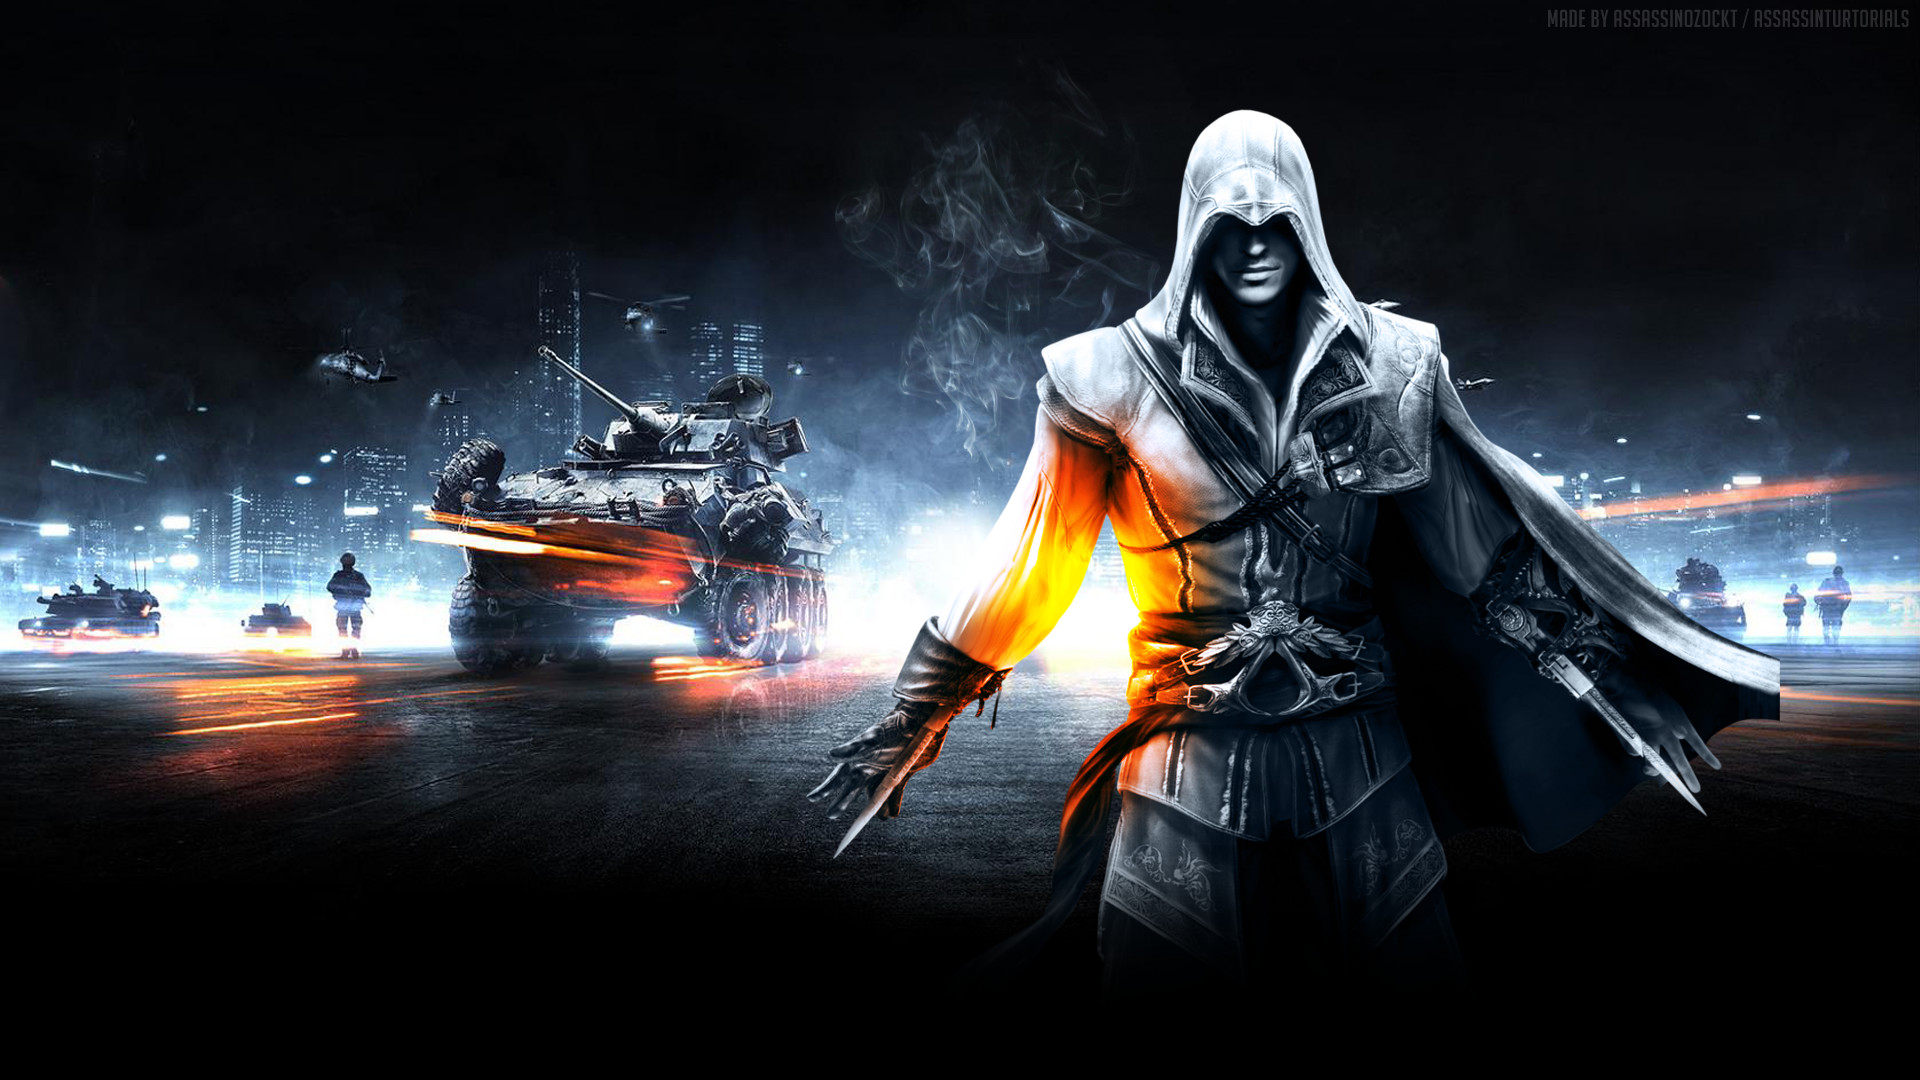 1920x1080 20 Awesome and Amazing 3D Video Games Wallpapers